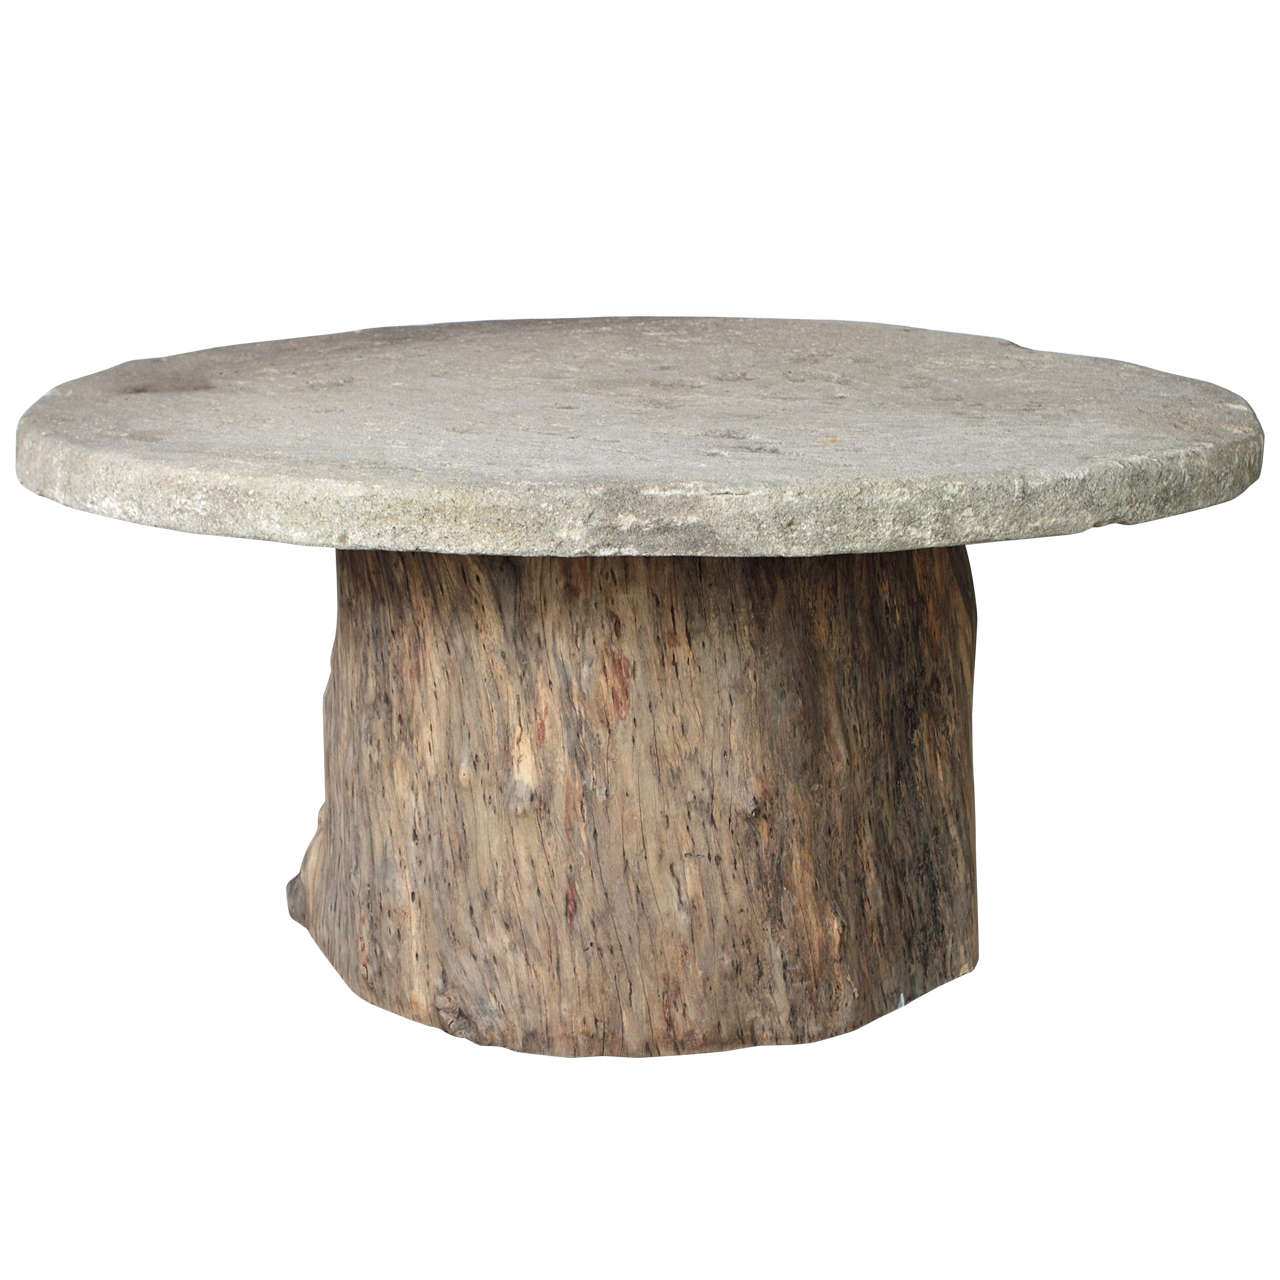 Chalkstone and Organic Lychee Wood Trunk Dining Table